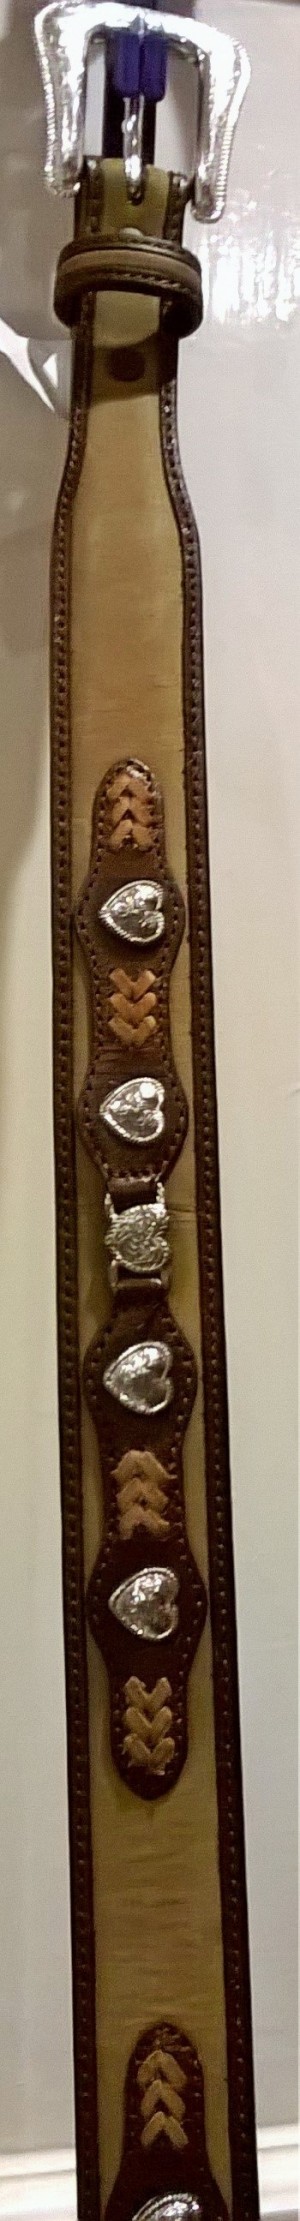 Western Belt, Leather with silver conchos and lace detail